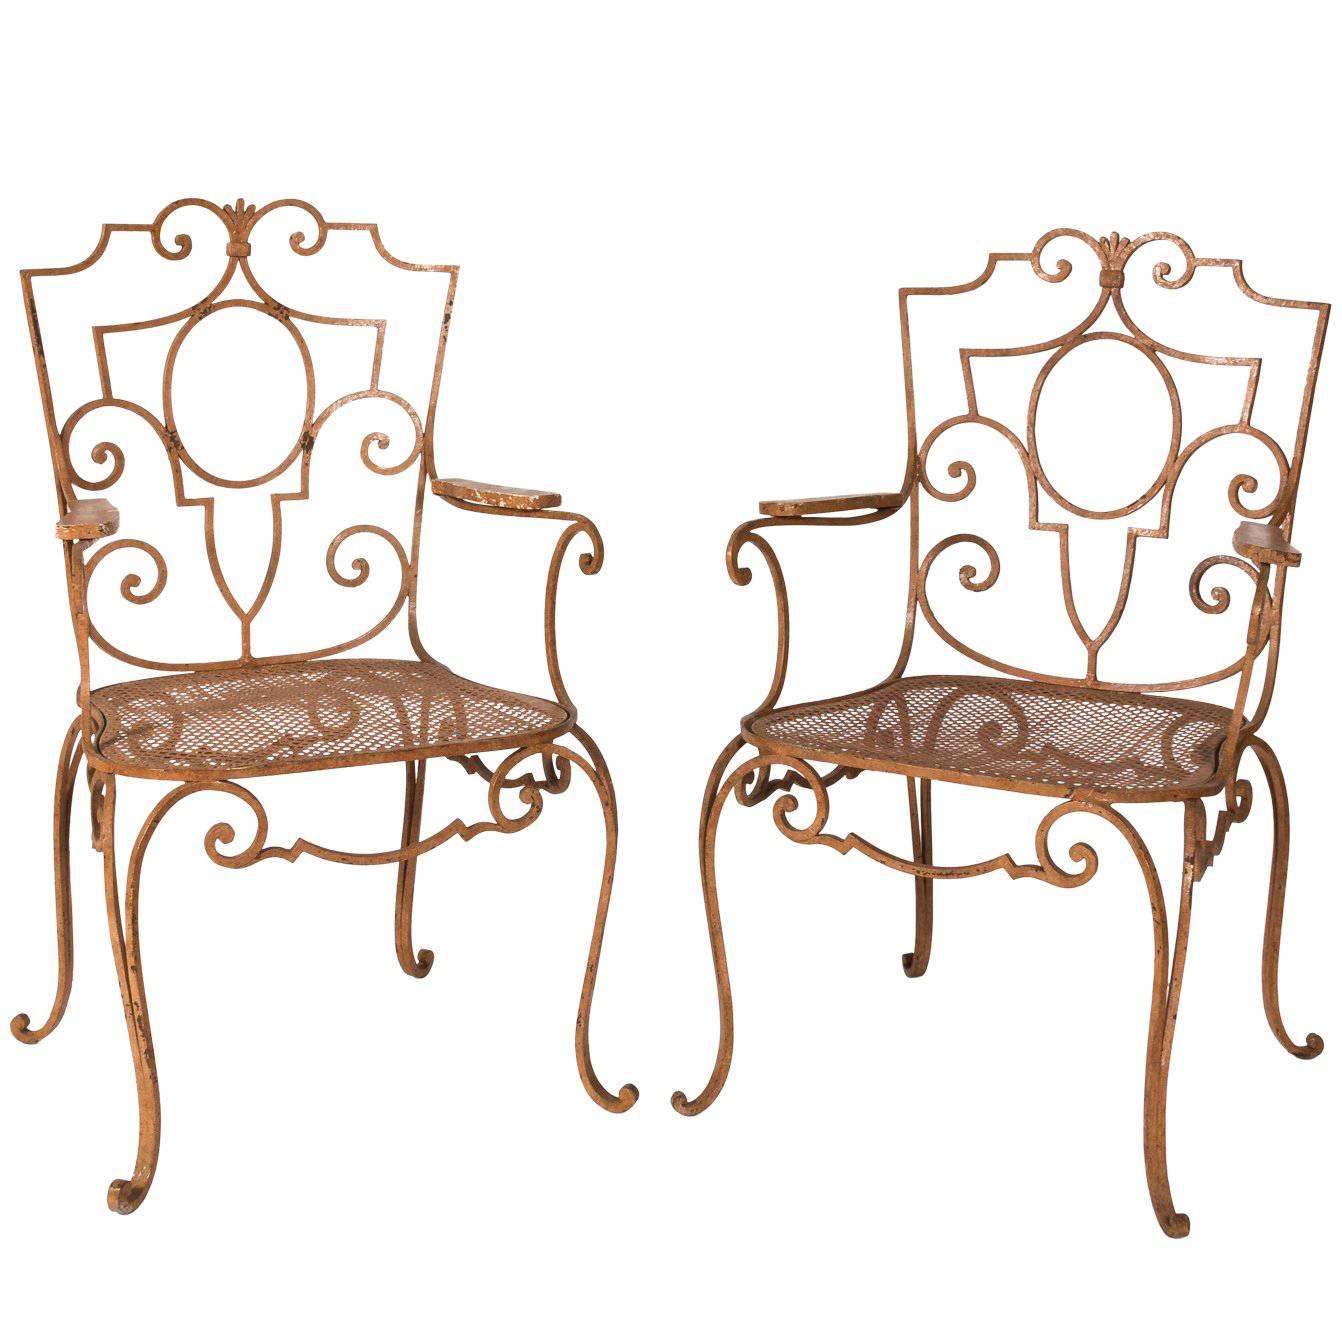 Pair of Jean Charles Moreaux Garden Chairs